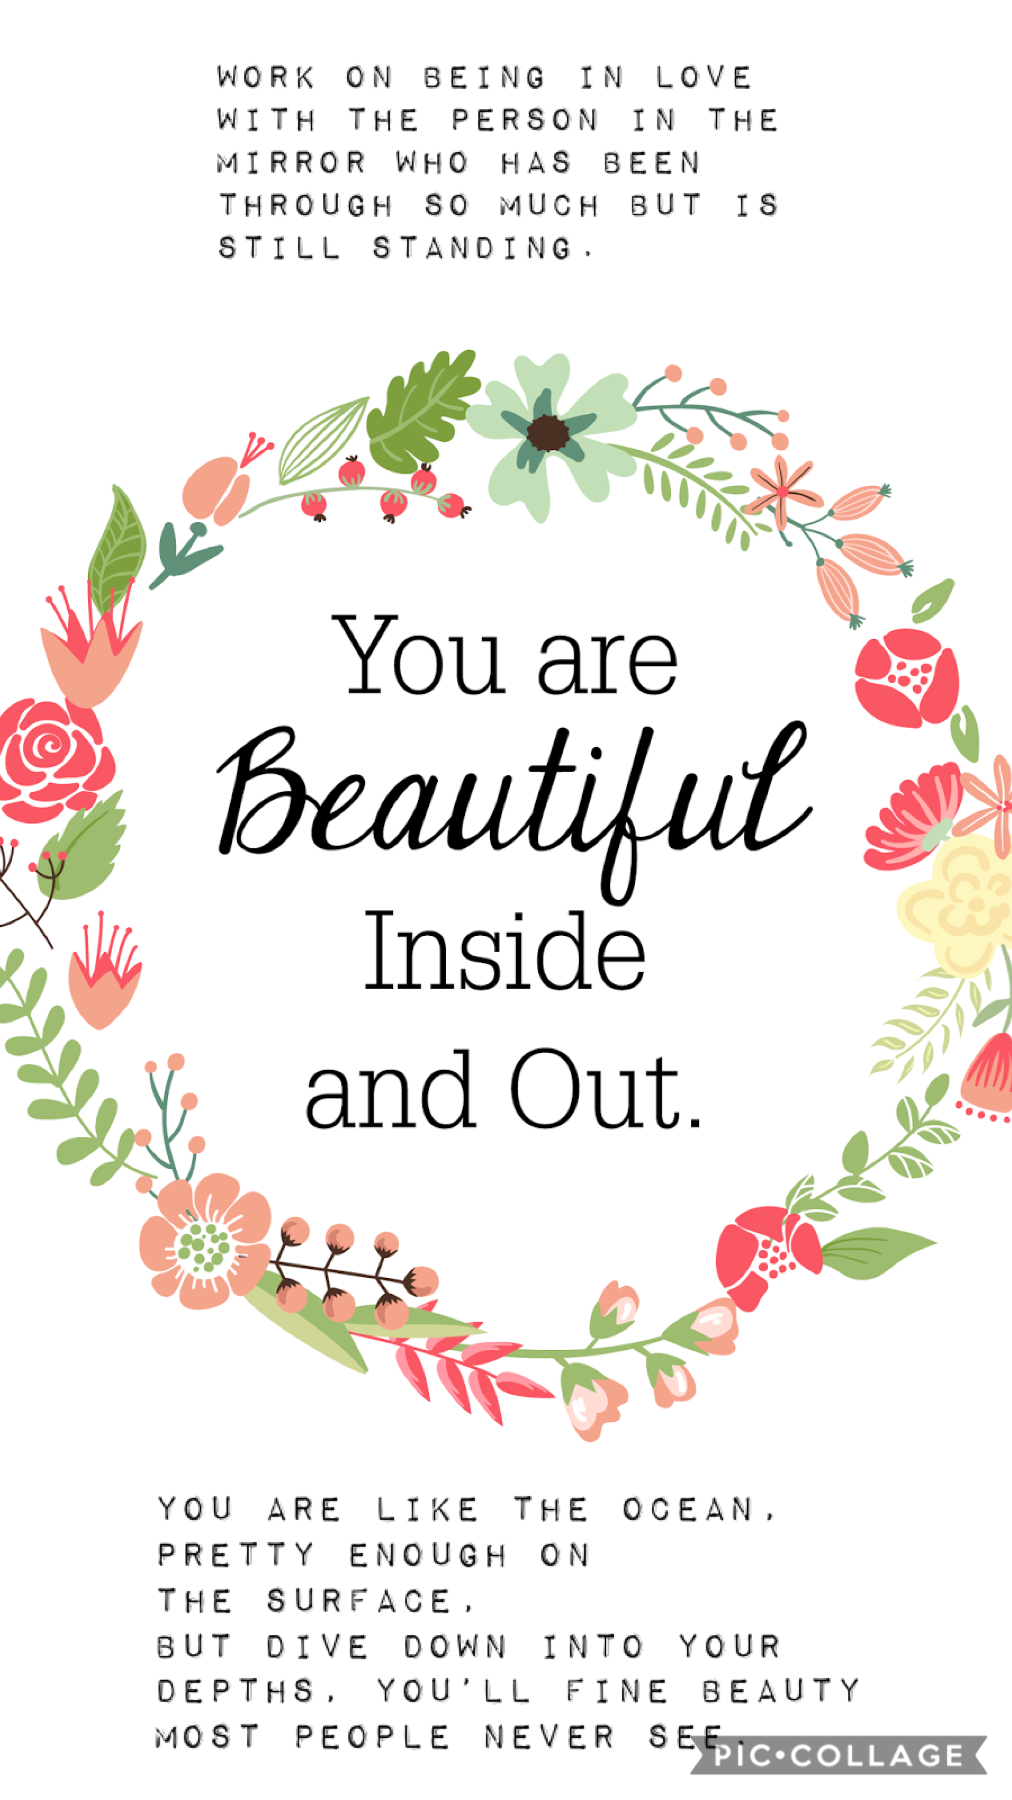 Also remember,
You are beautiful!!